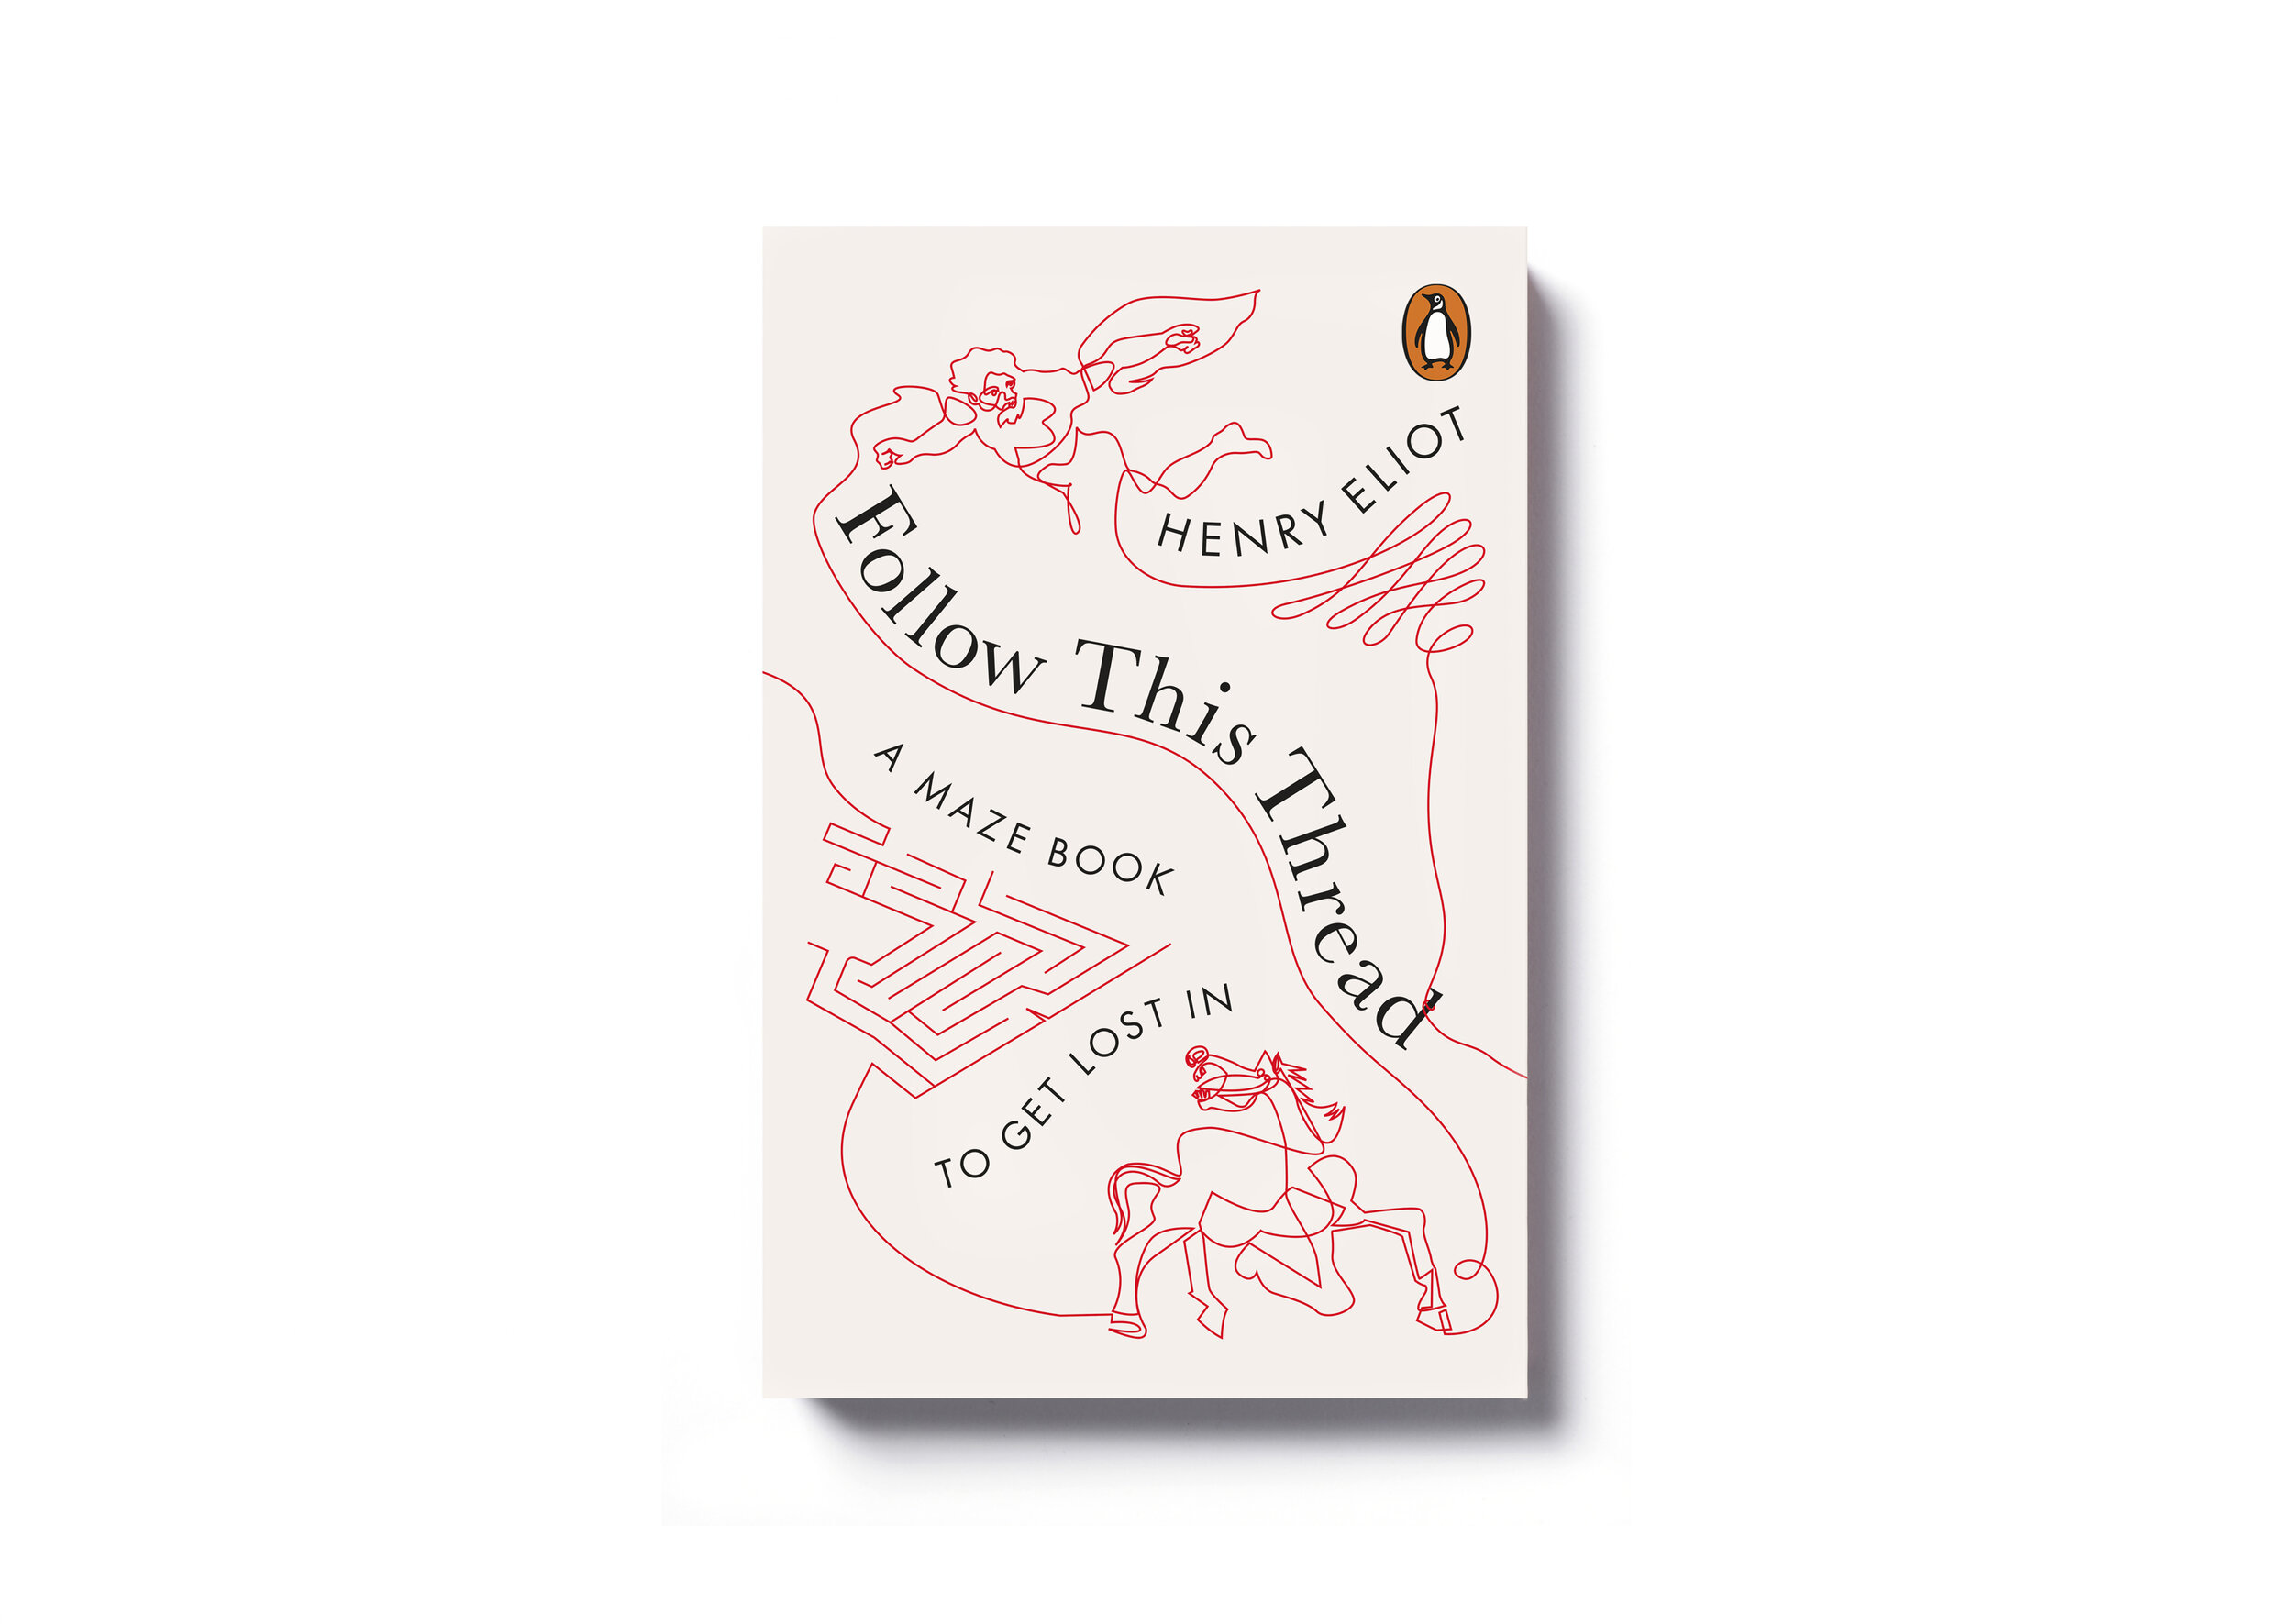  ‘Follow This Thread’ by Henry Eliot - A maze book to get lost in - Design: Jim Stoddart Illustration: Quibe 